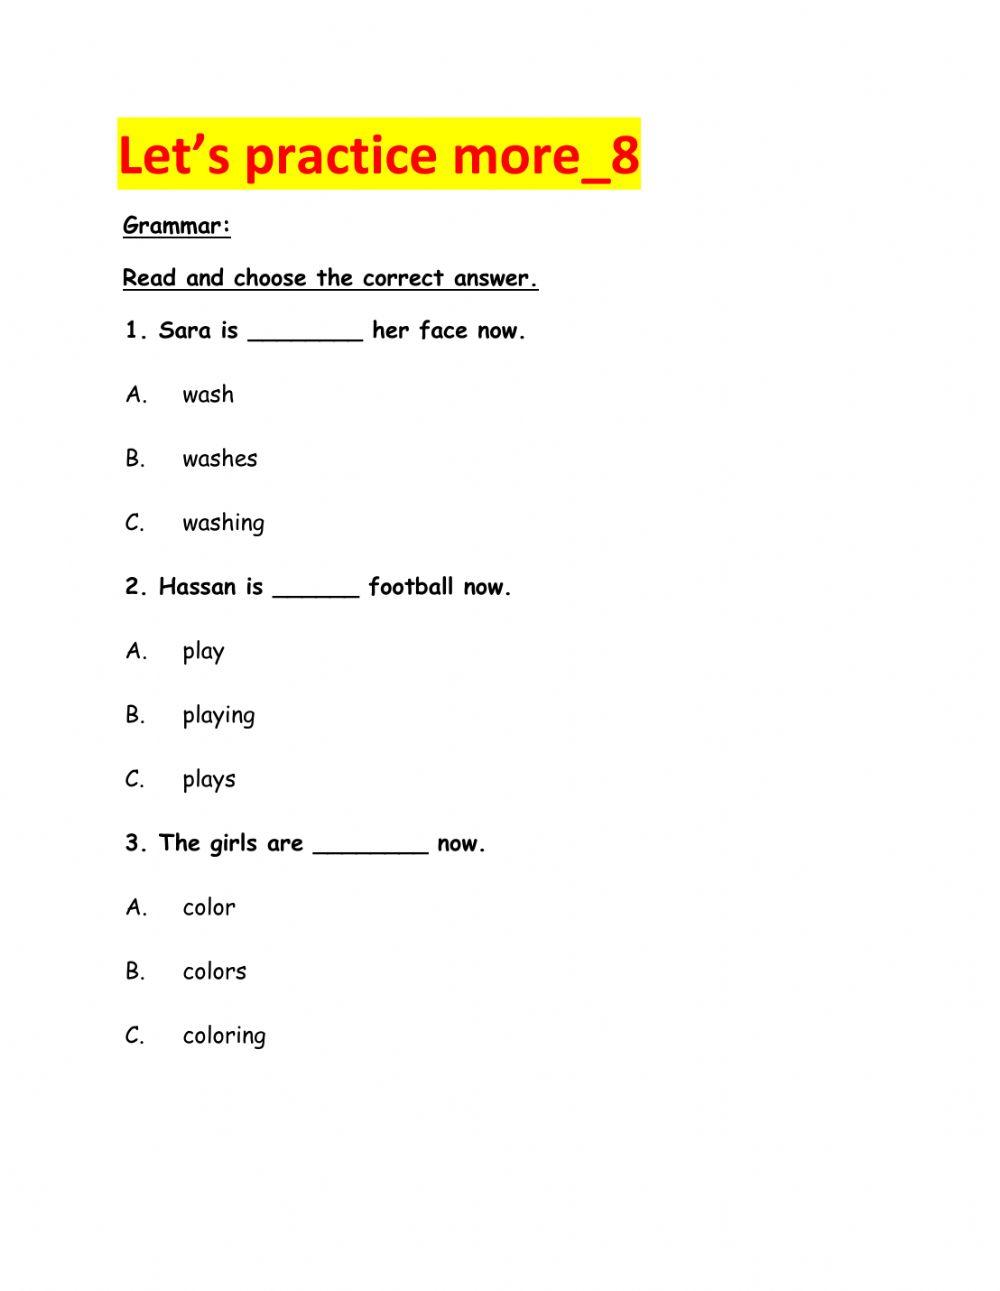 Let's practice more -8